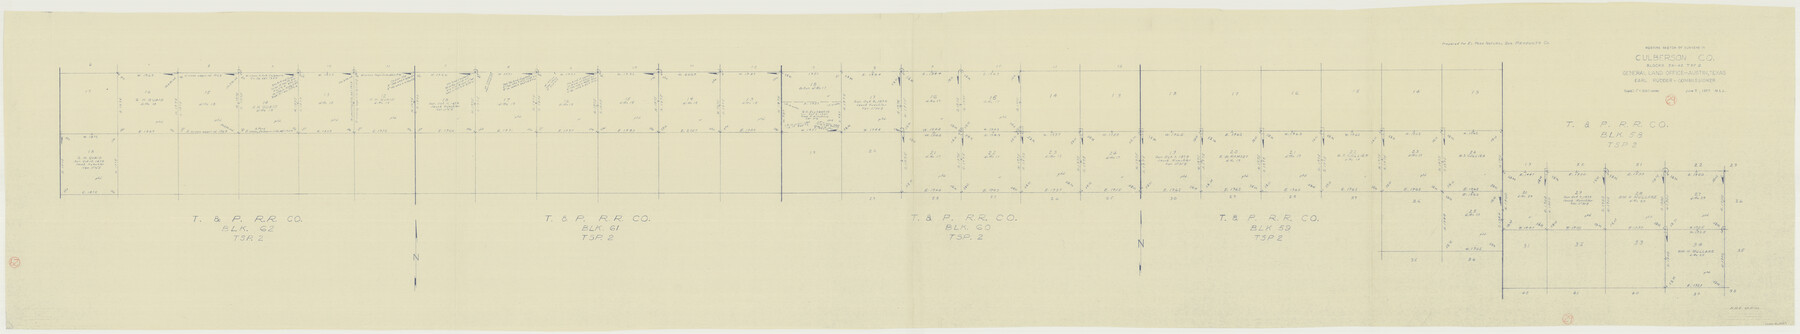 68482, Culberson County Working Sketch 29, General Map Collection